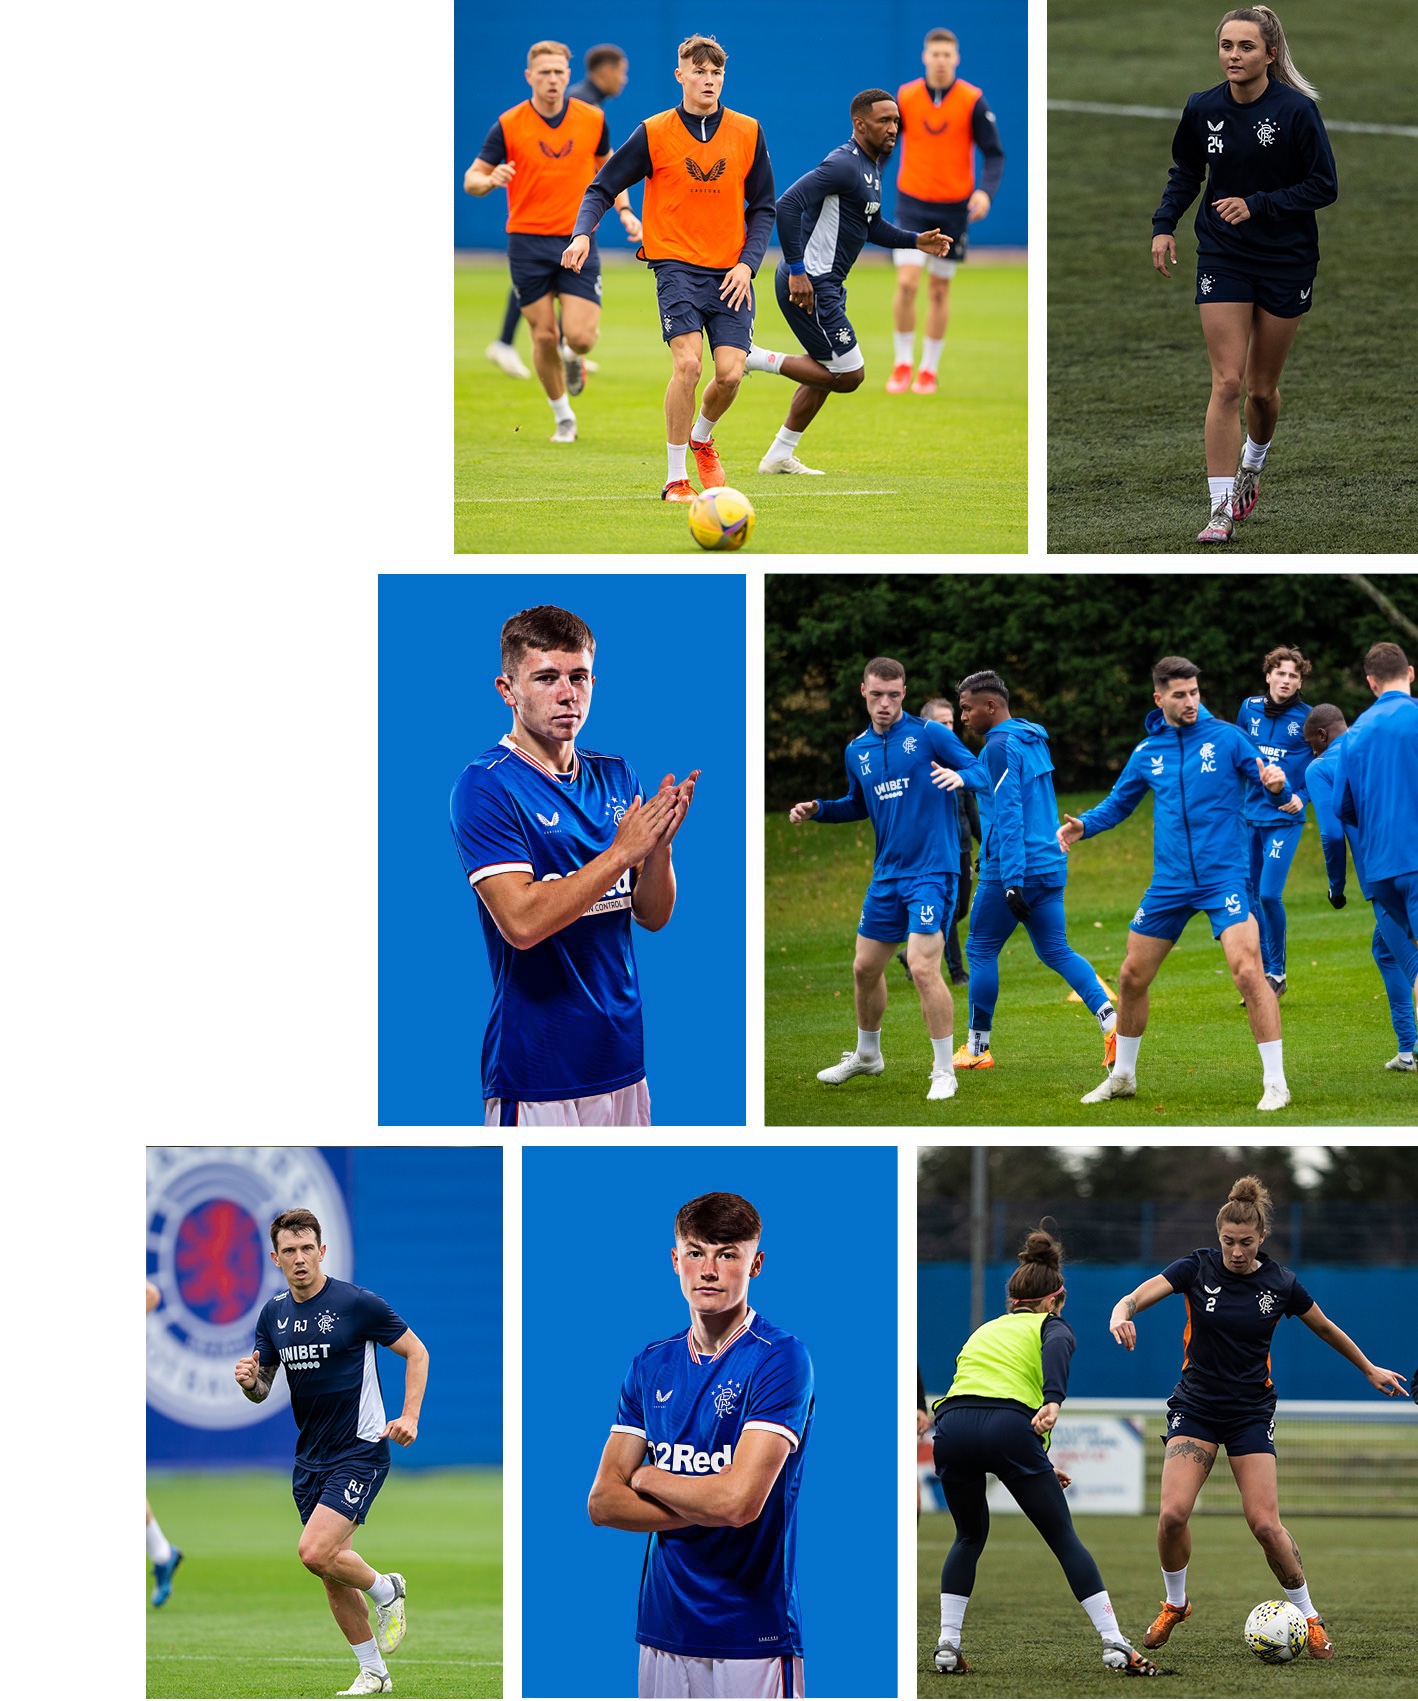 Collage of Rangers players and coaches